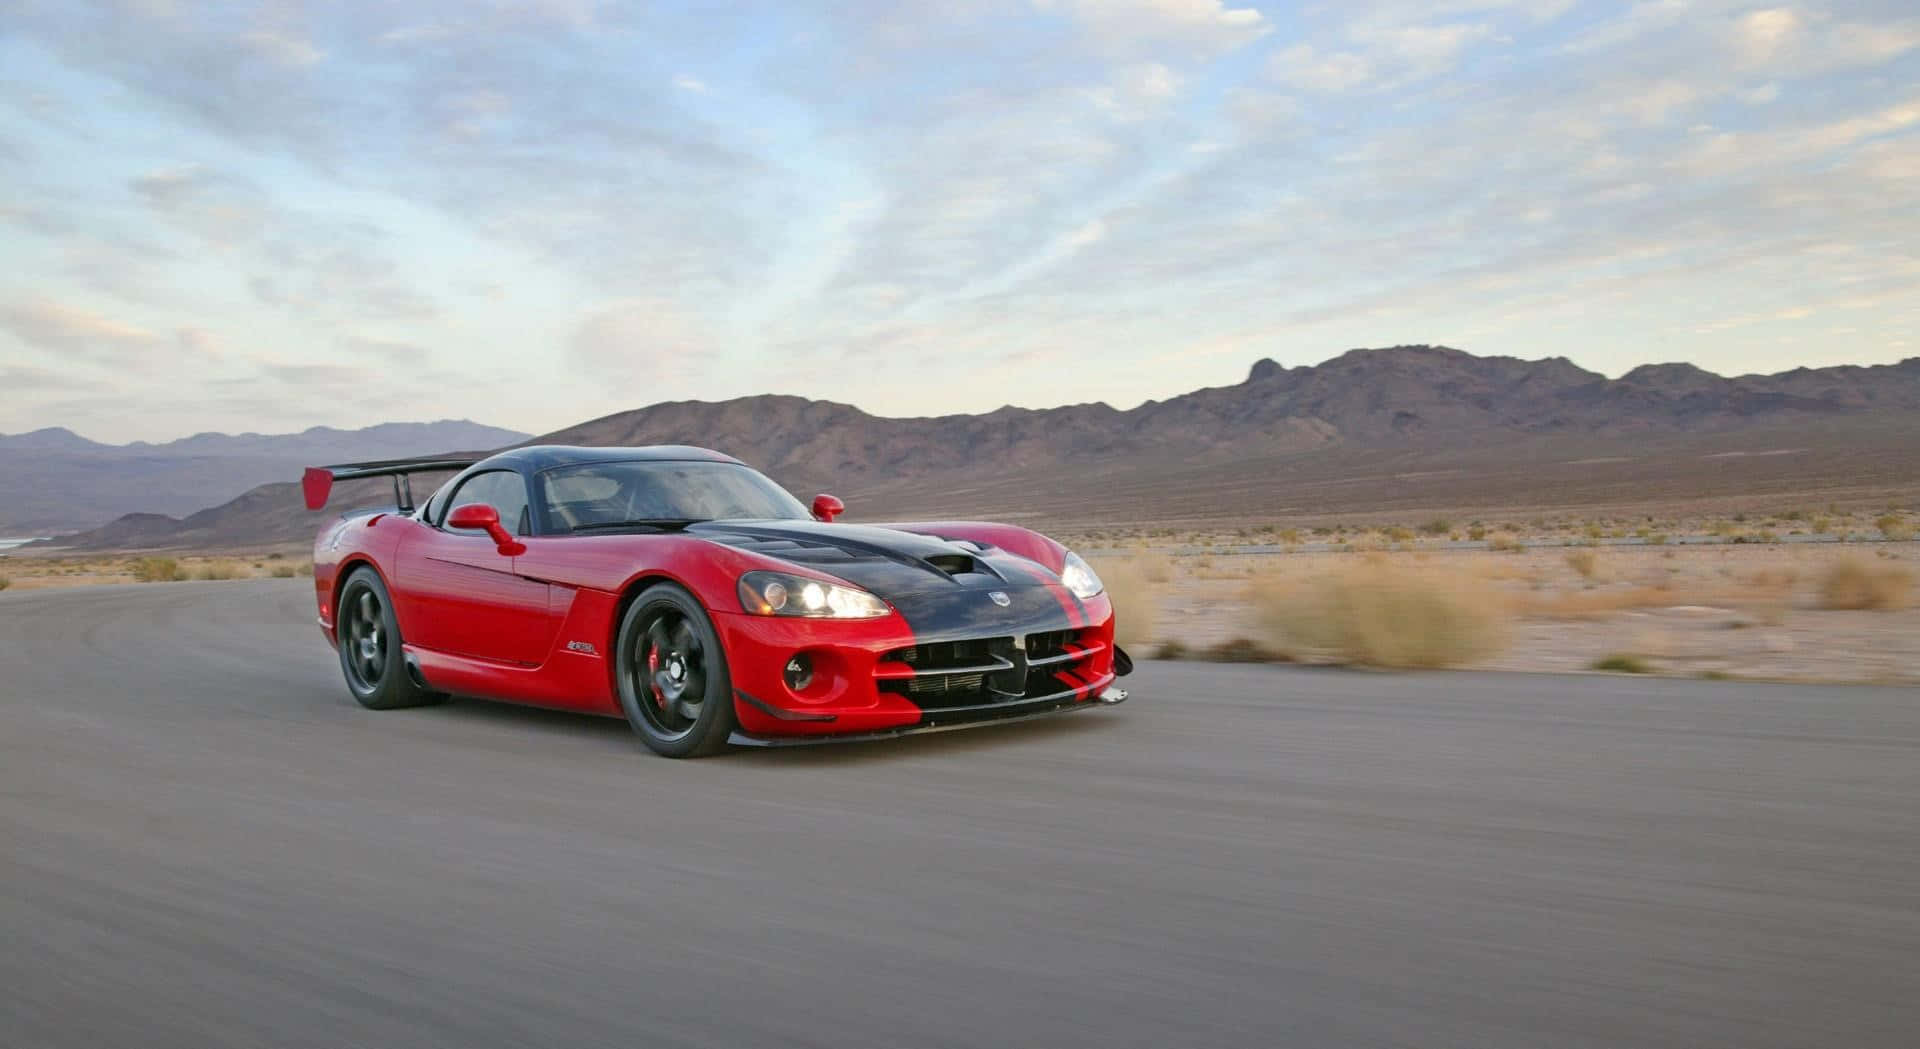 Luxury rides in style with the Dodge Viper Wallpaper